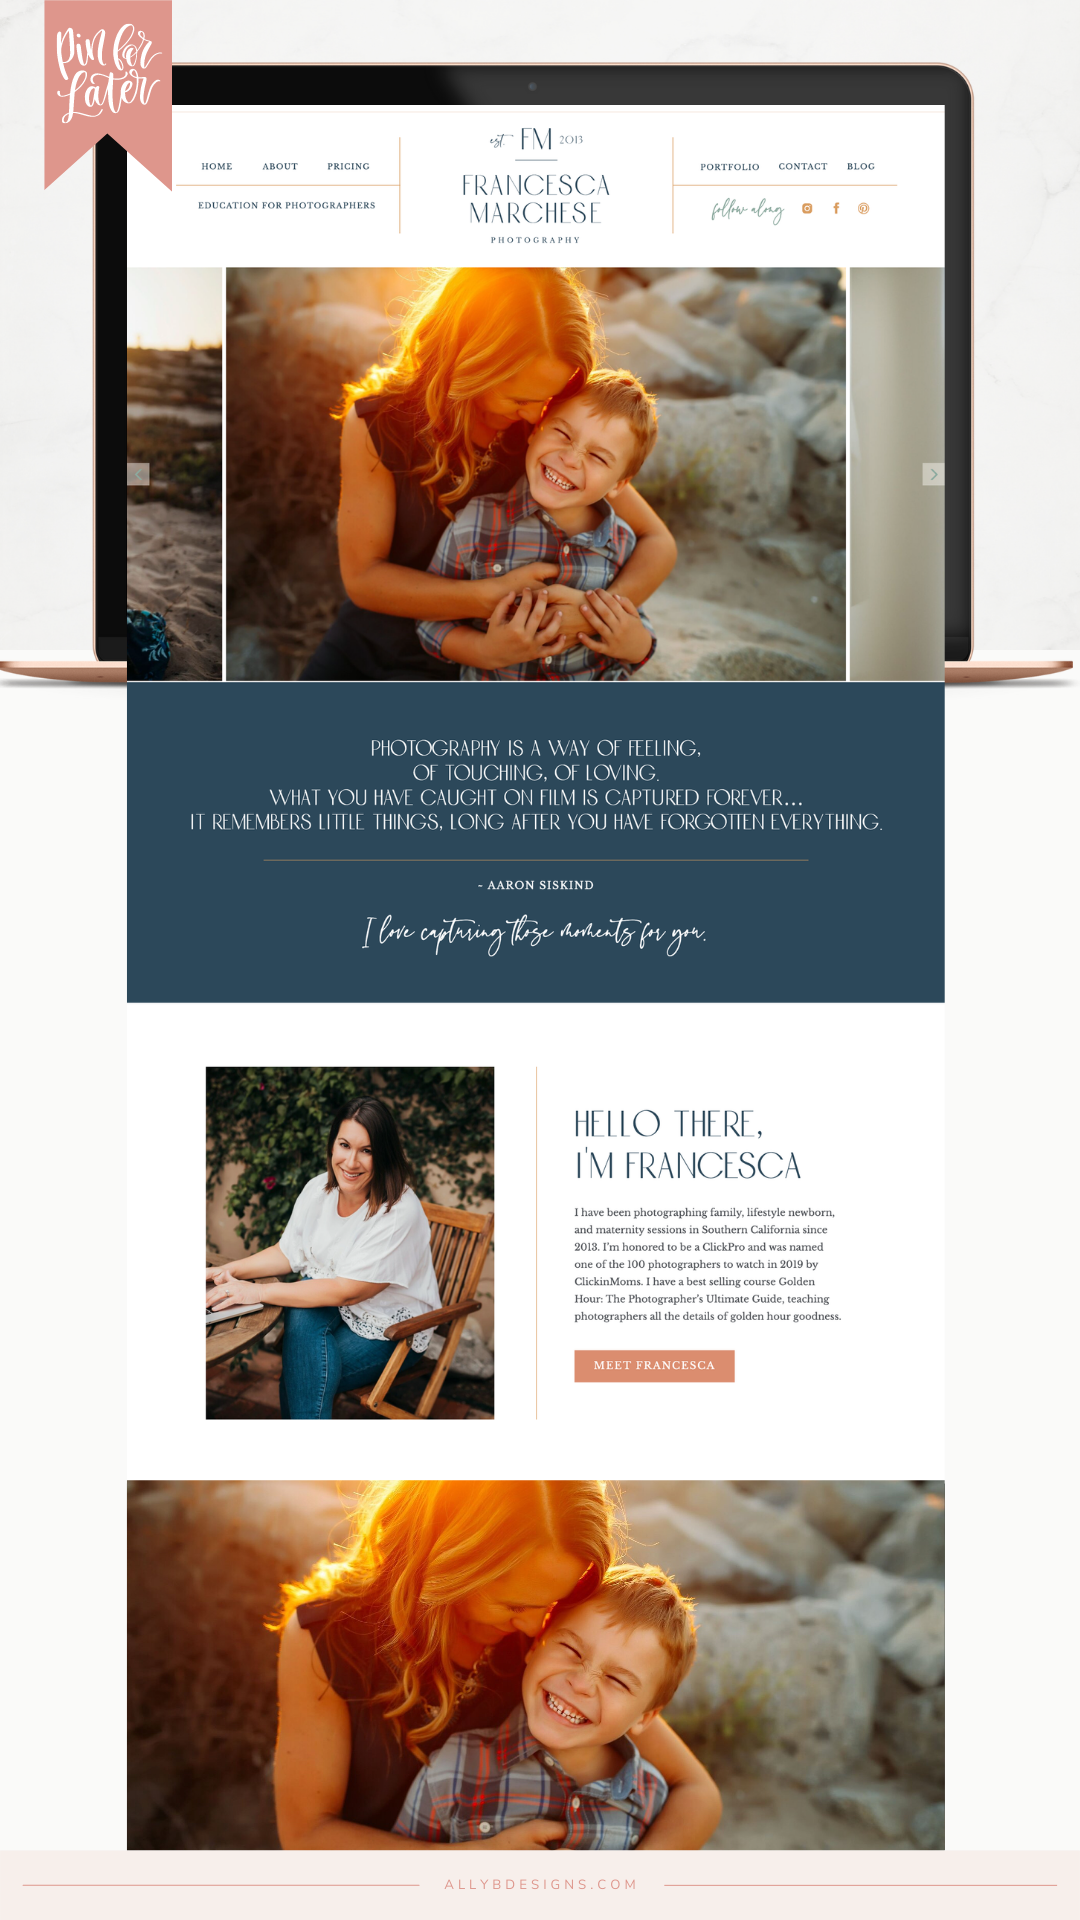 A Portrait Photography Website Client Launch: Francesca Marchese Photography. Branding and Website Design By Ally B Designs